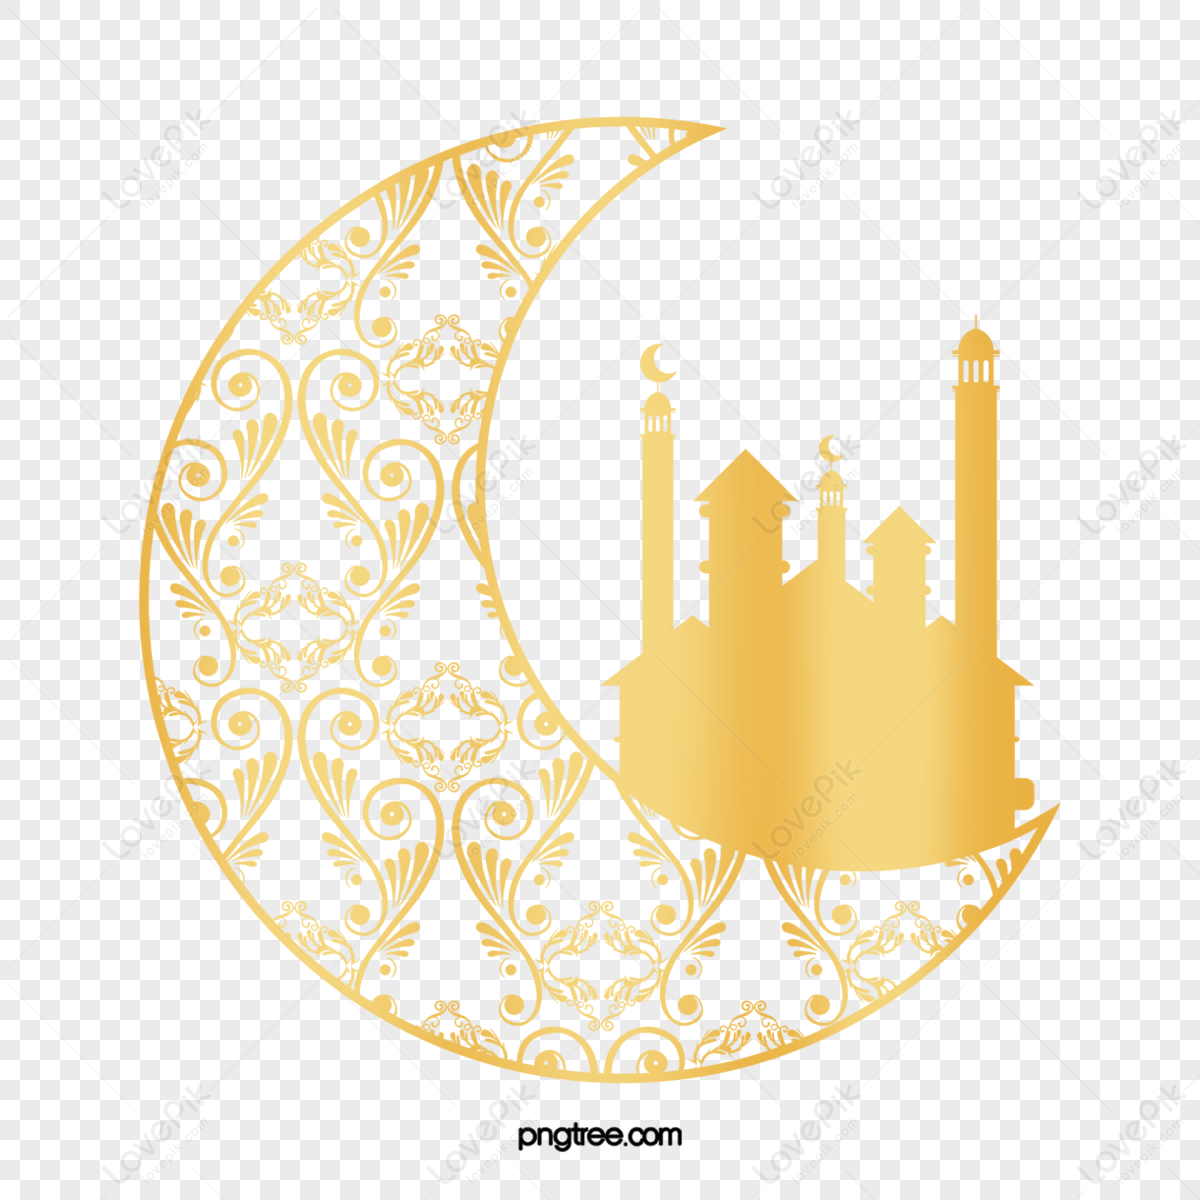 Islamic Mosque Ramadan PNG Images With Transparent Background | Free ...